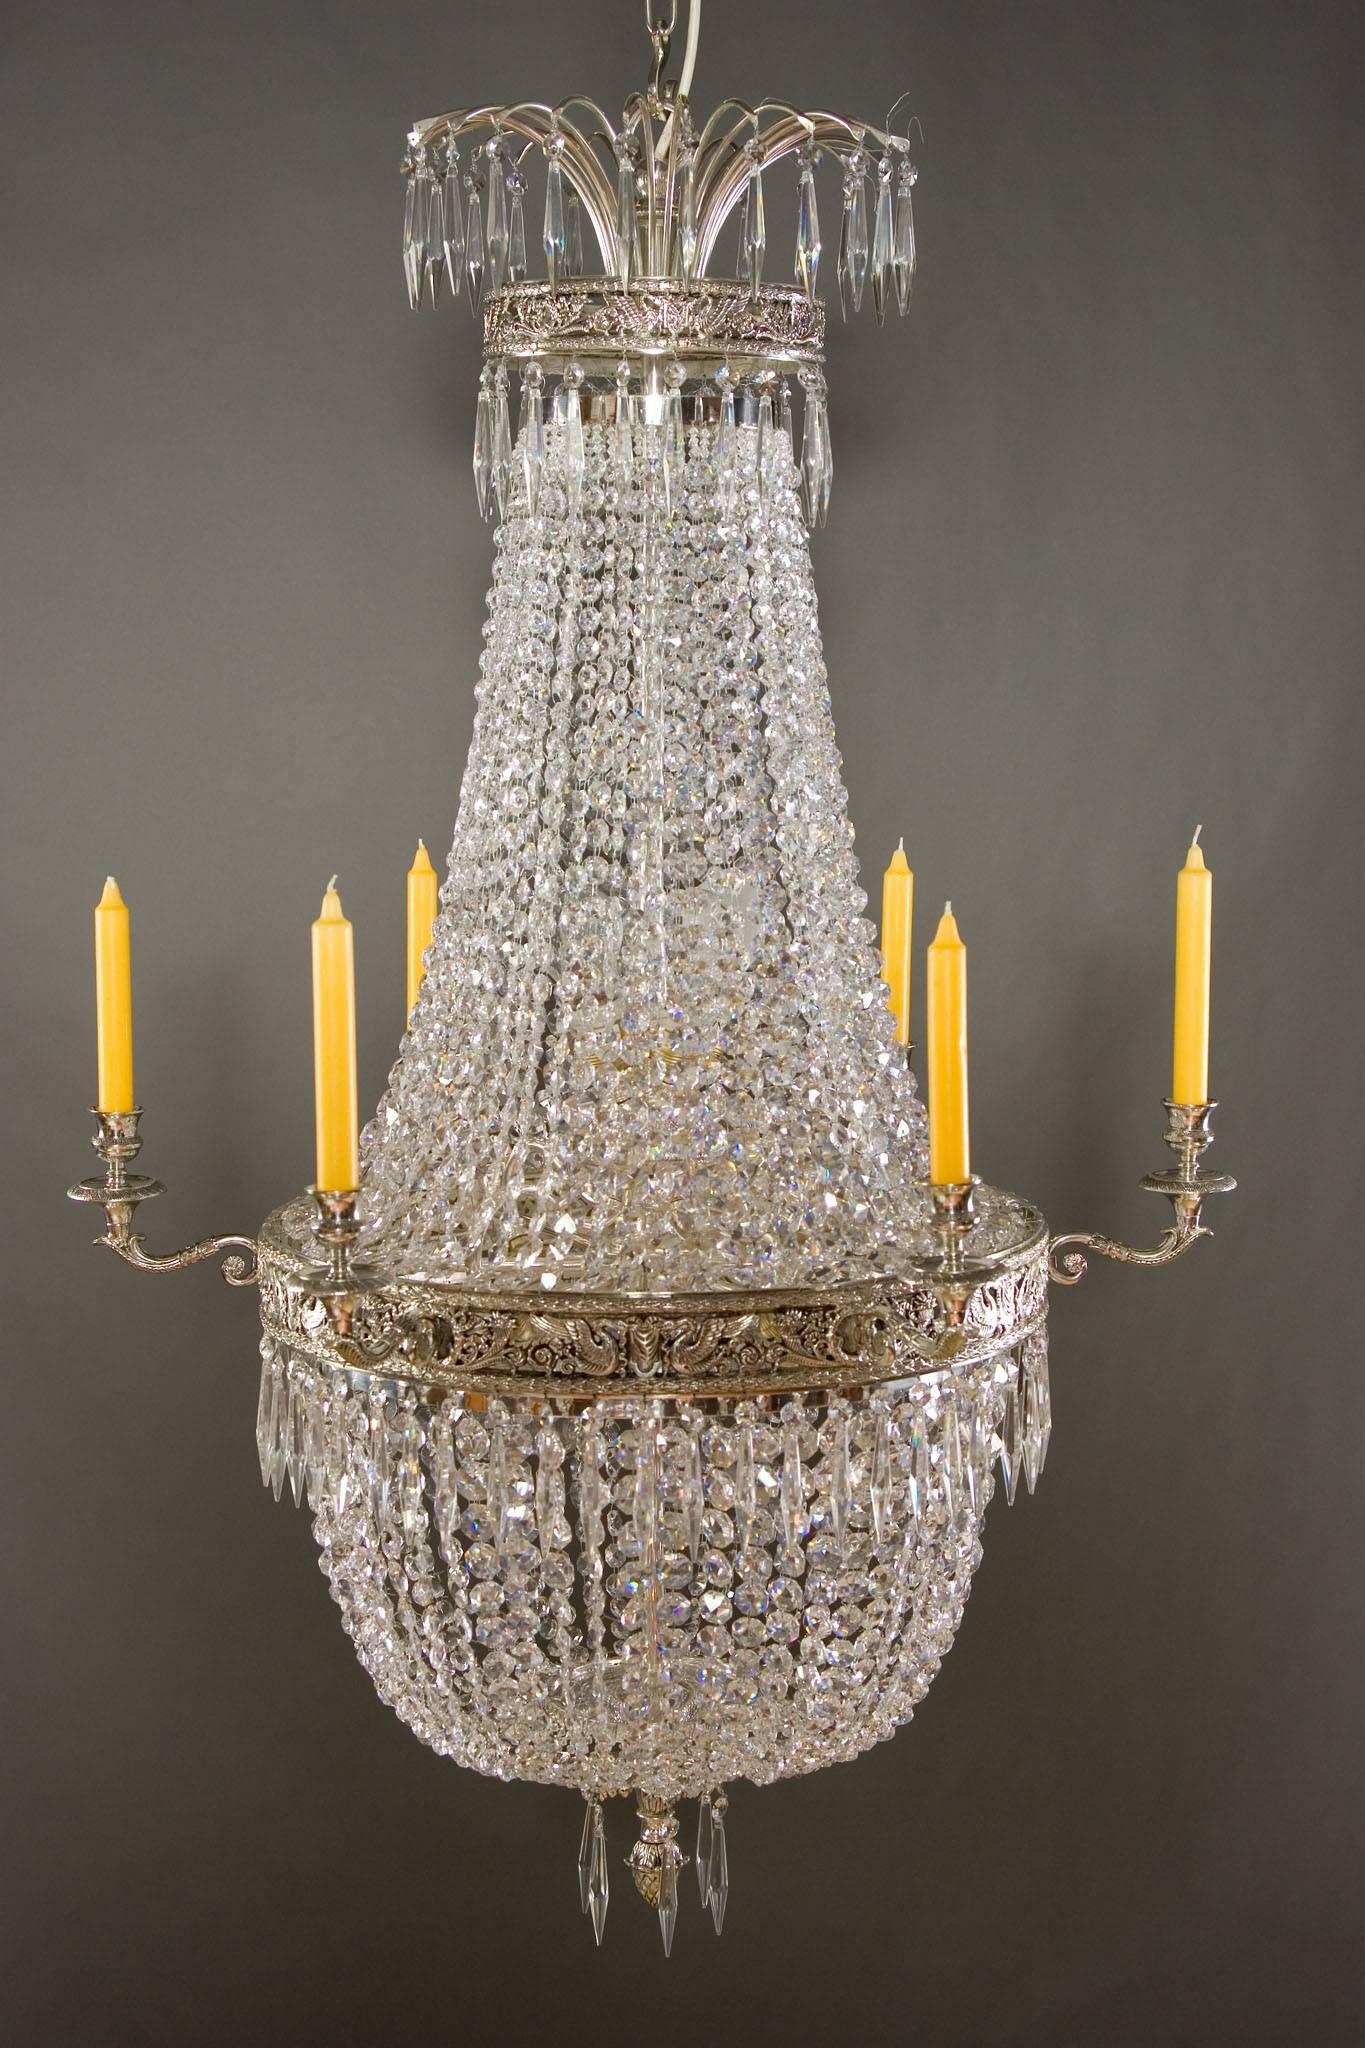 20th Century Empire style basket chandelier

Classicist basket chandelier in Empire style.
Finely cast, Bronze silvered. Adorned with engraved swans and pearl cords.

(F-Ra-20).